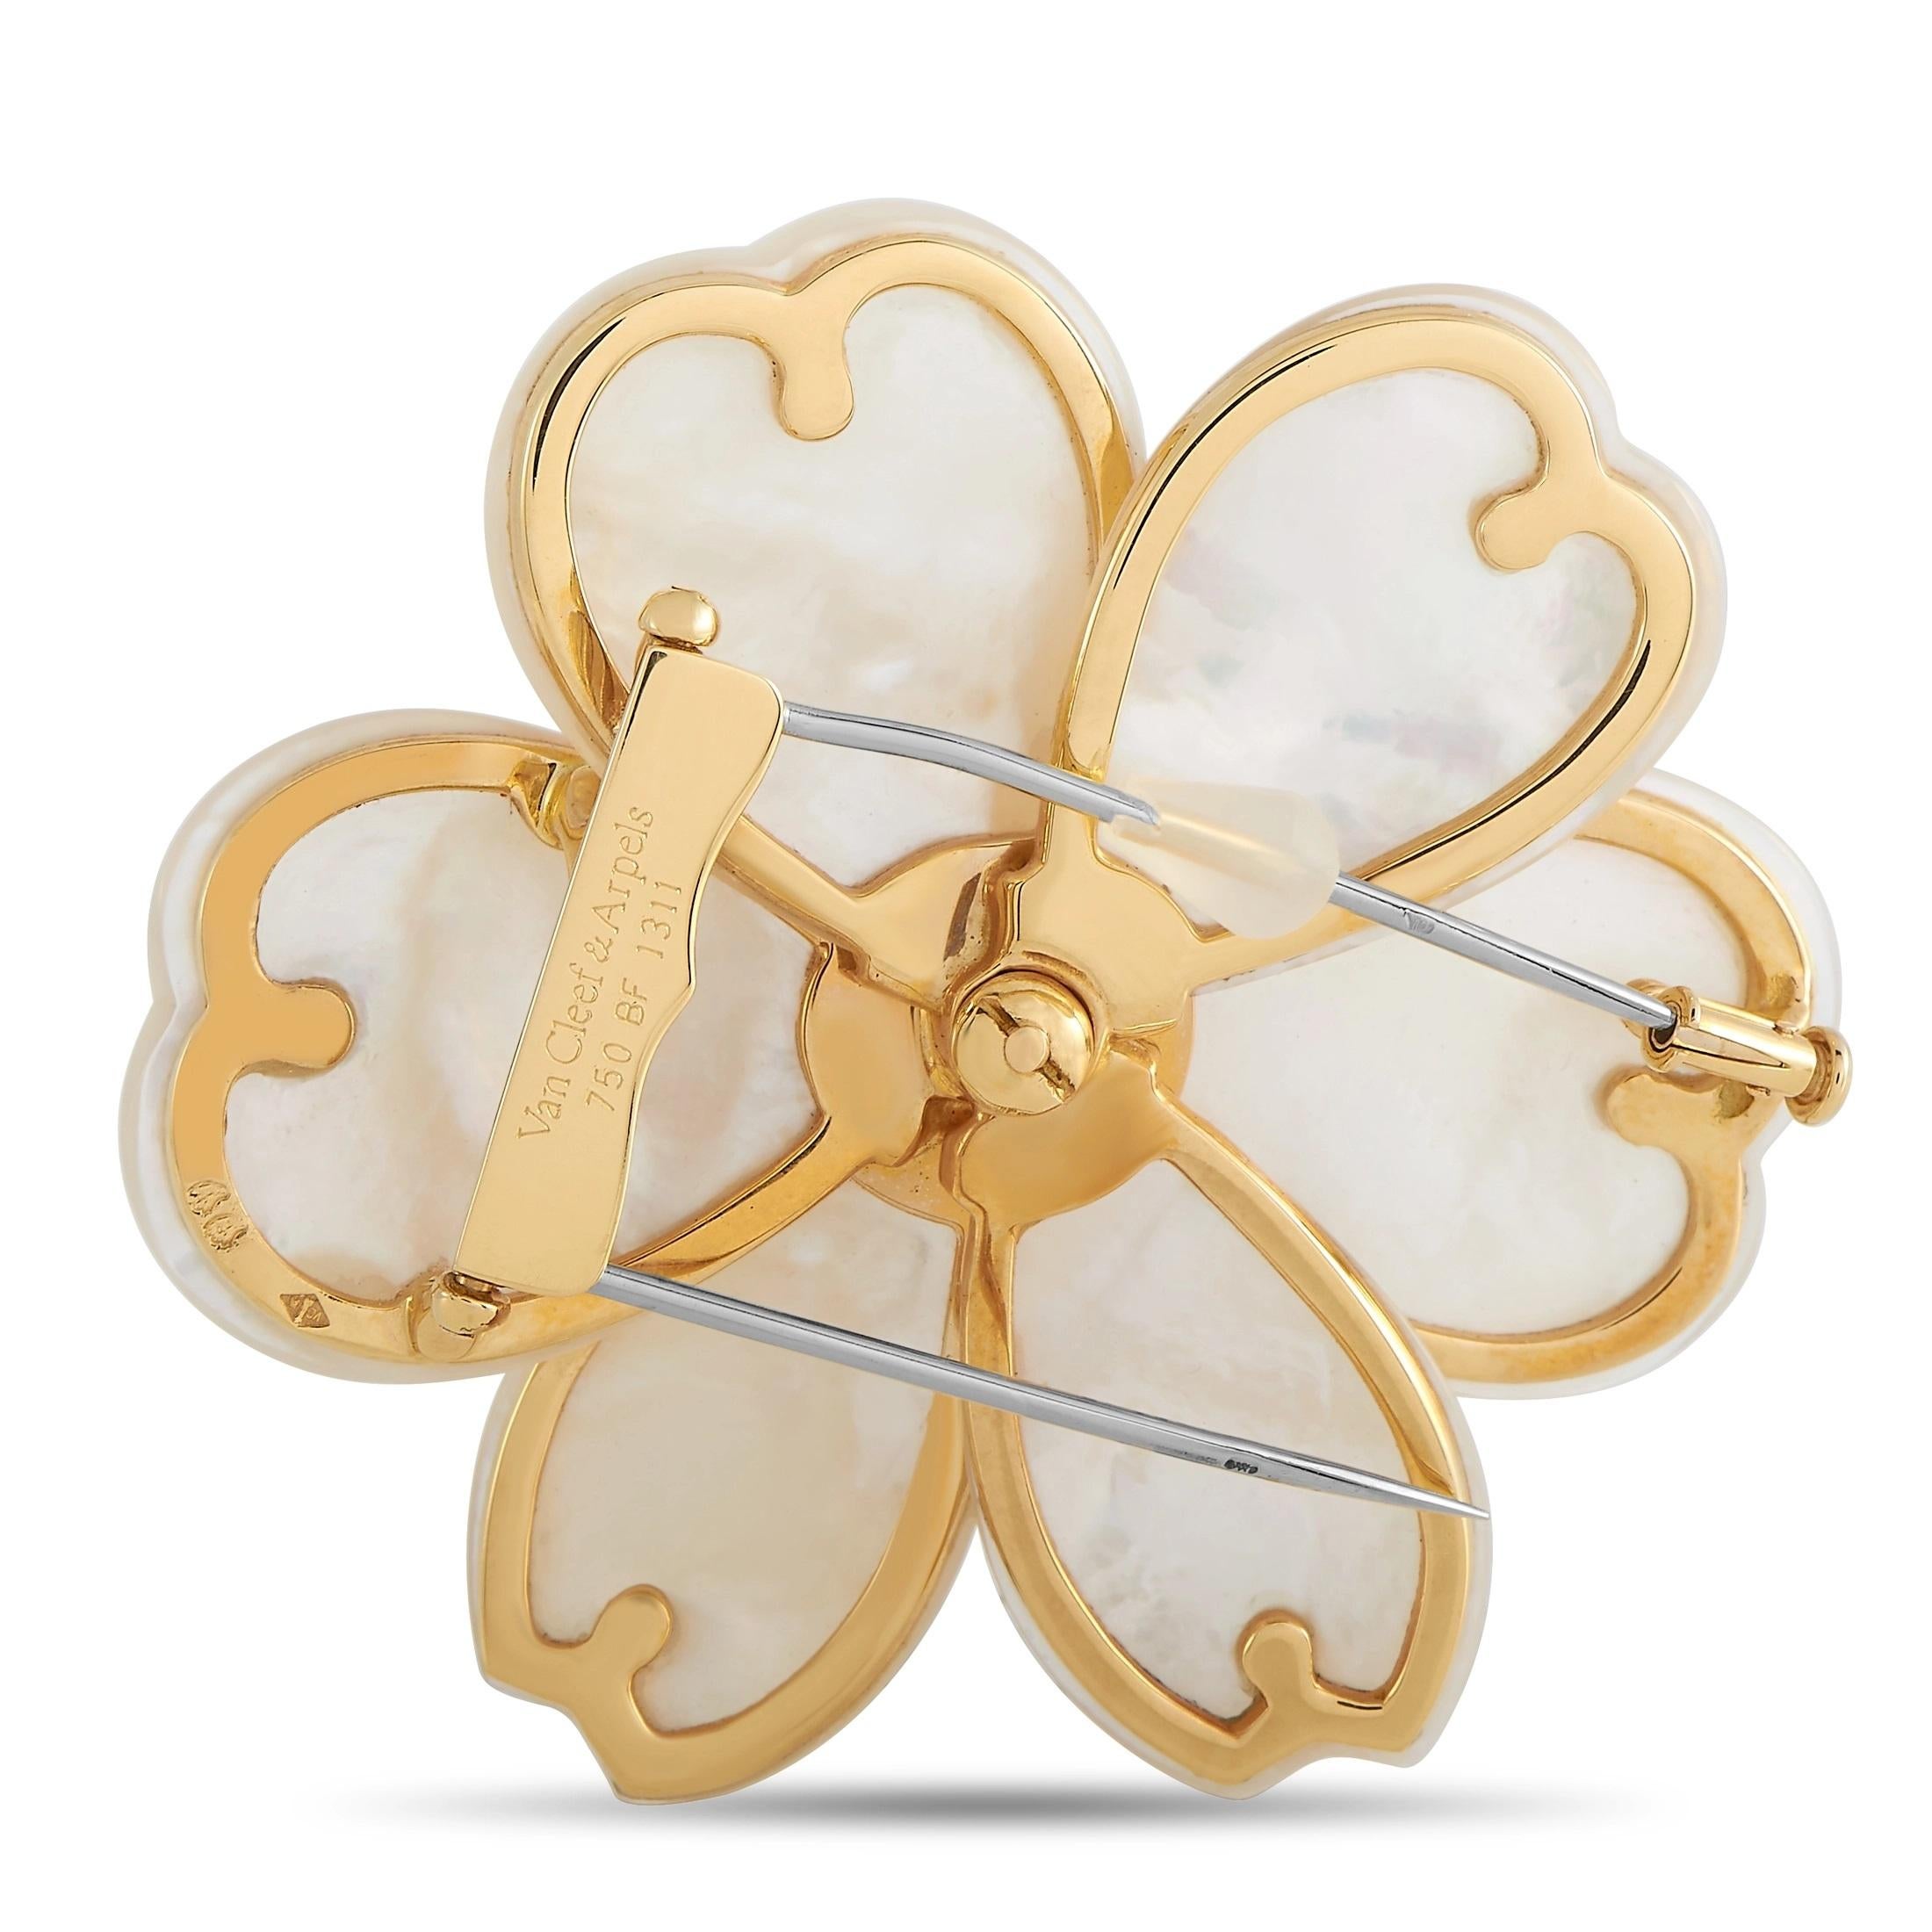 Add this Van Cleef & Arpels Rose De Noel brooch to any ensemble to instantly increase the luxury. This flower-shaped pin comes to life thanks to captivating Mother of Pearl “petals,” which extend from an 18K Yellow Gold center adorned with 1.54